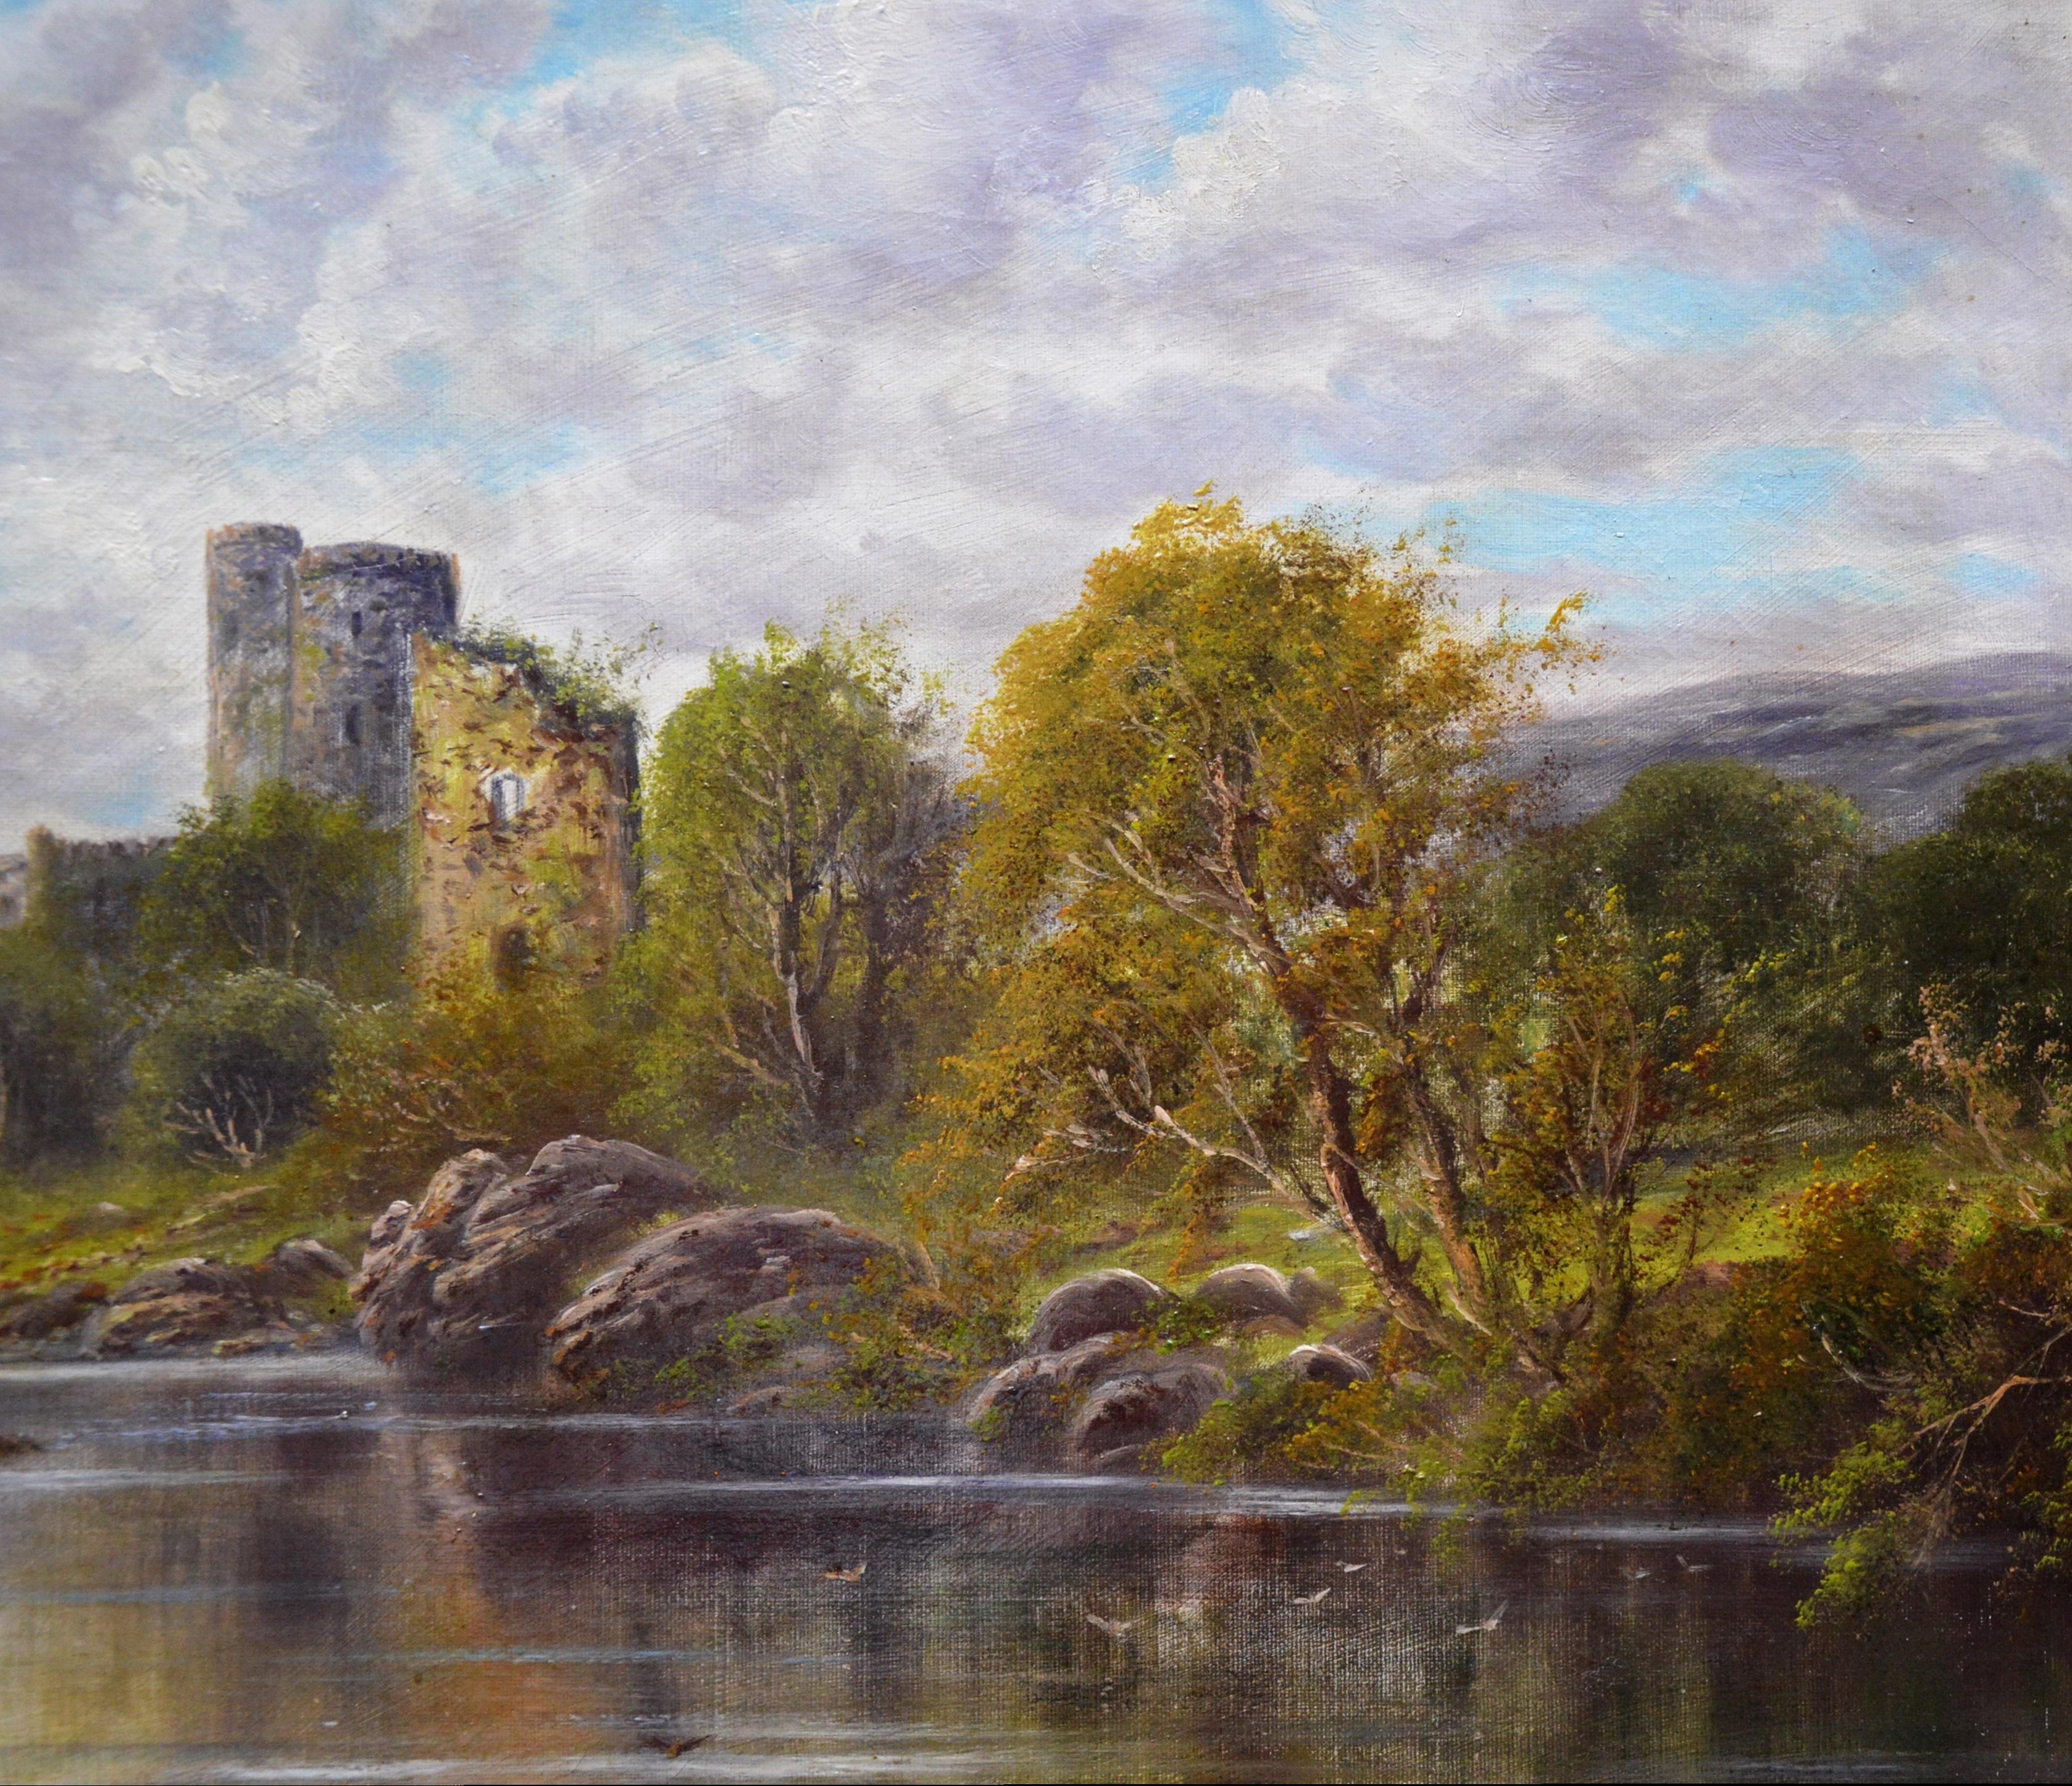 A large 19th century oil on canvas depicting ‘Glengarry Castle’ on Loch Oich in the Highlands of Scotland by the listed Victorian landscape artist Josiah Clinton Jones RCA (1848-1936). The painting is signed and hangs in a fine quality newly